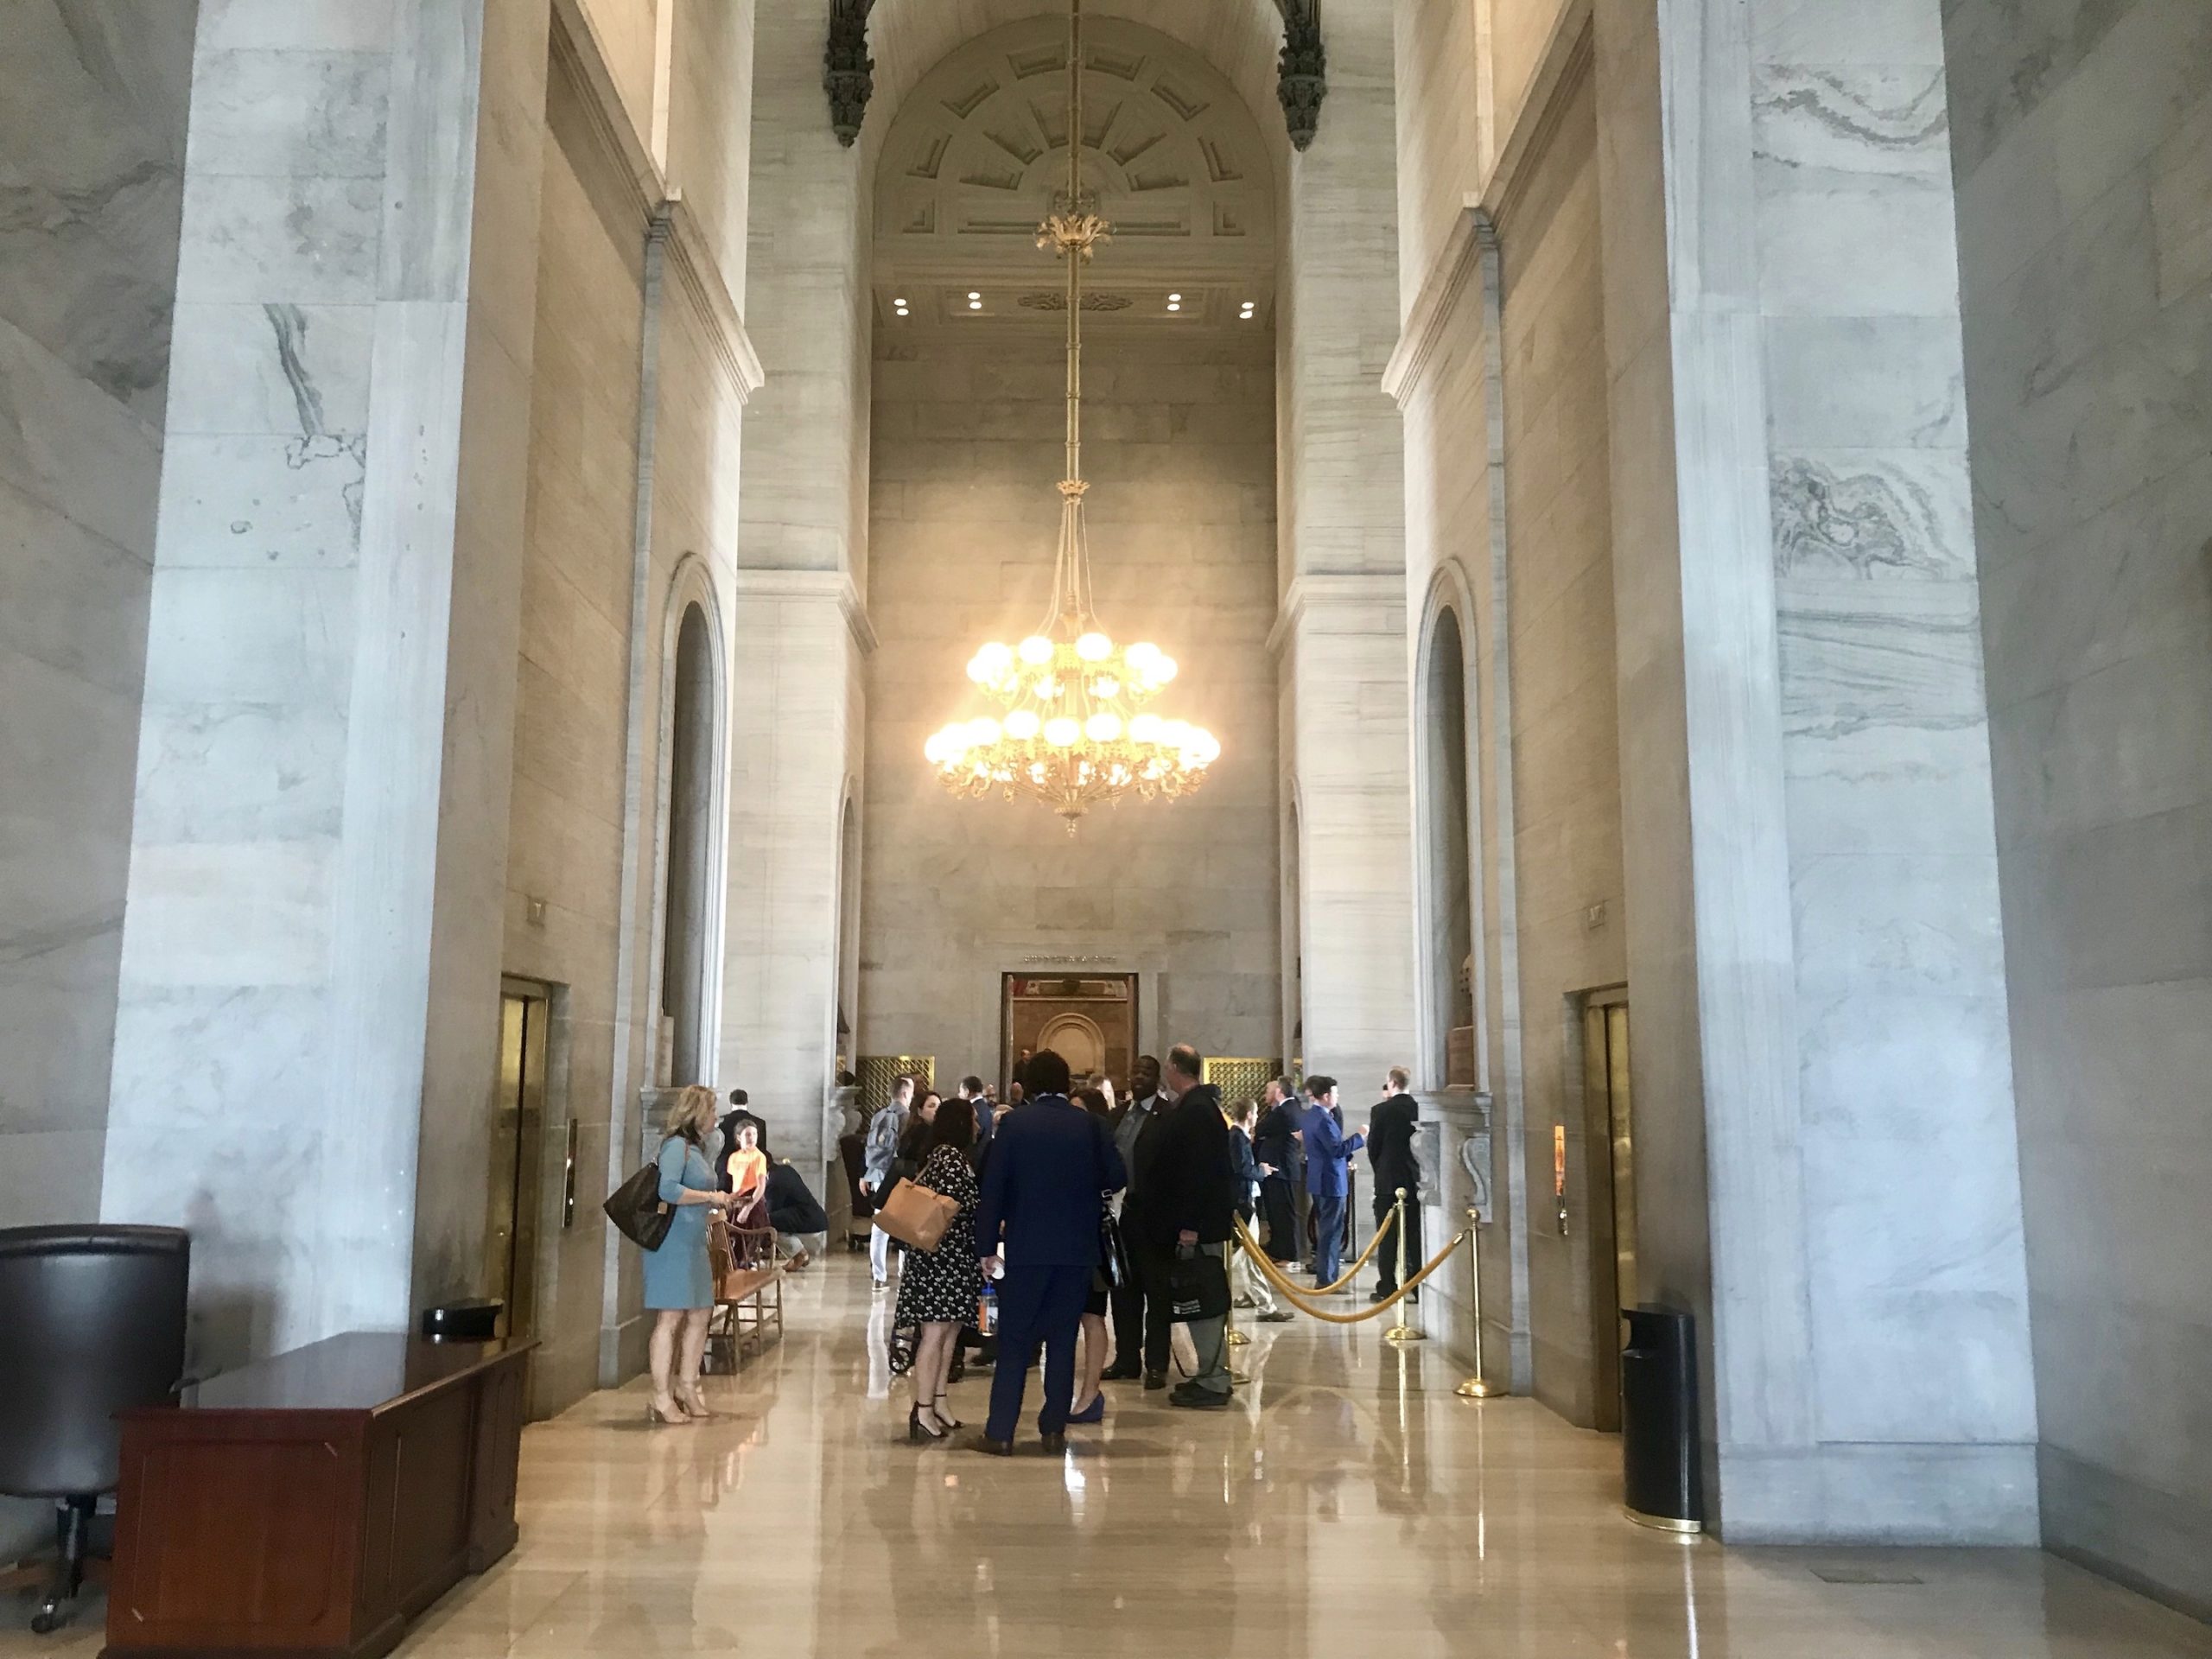 People flanked by tall pillars stand in the Tennessee State Capitol rotunda.